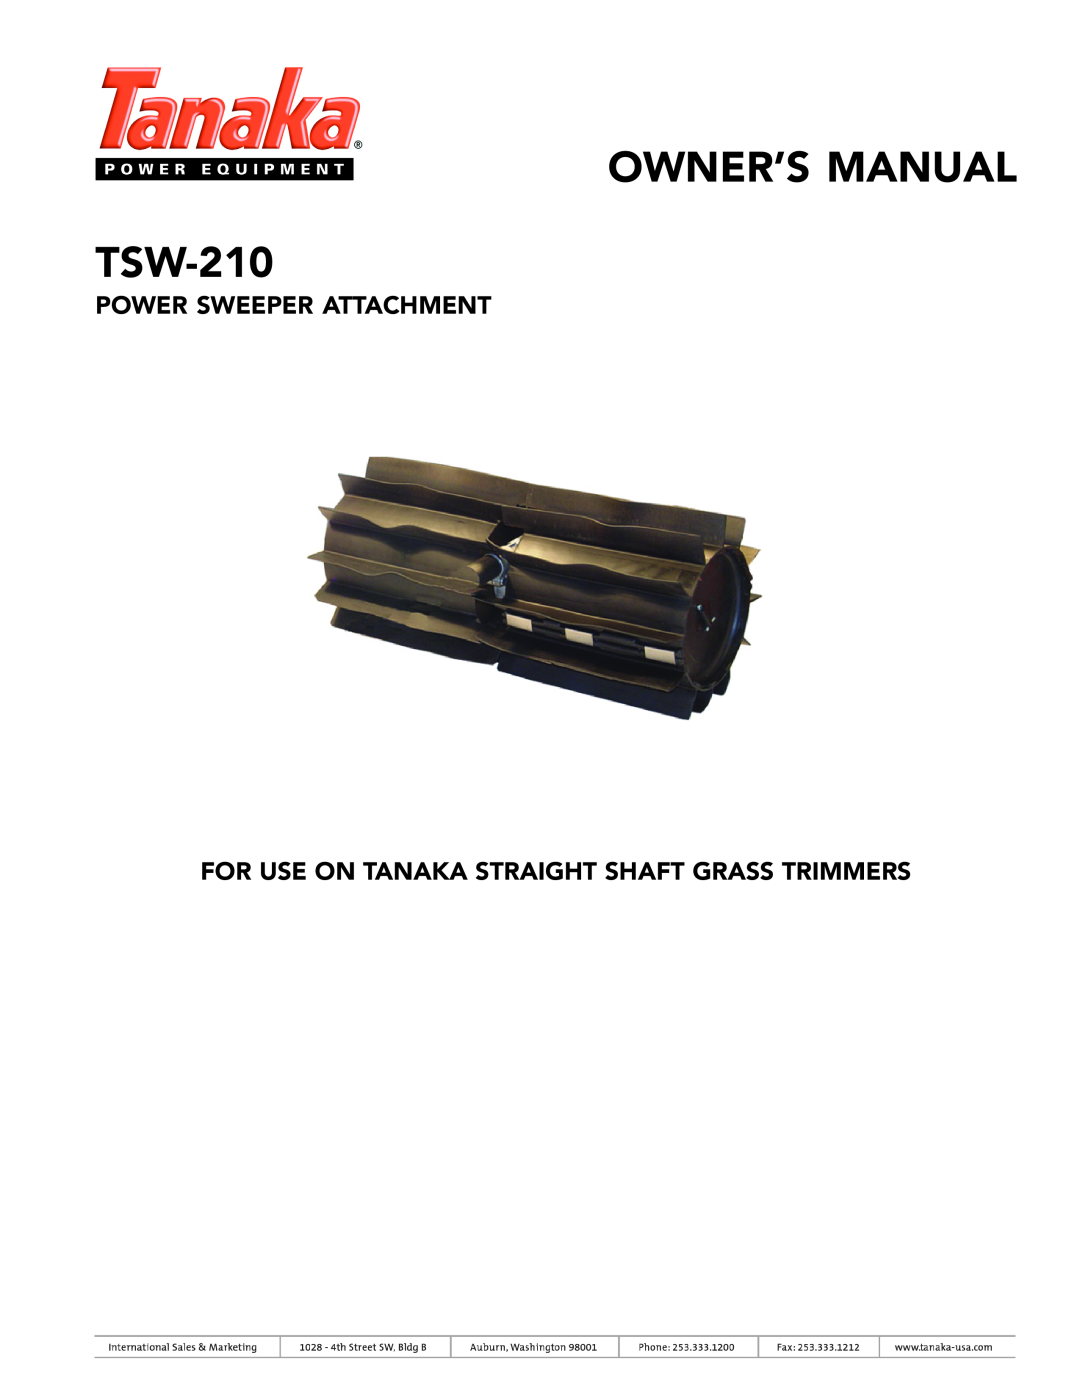 Tanaka TSW-210 owner manual Power Sweeper Attachment, For Use On Tanaka Straight Shaft Grass Trimmers 